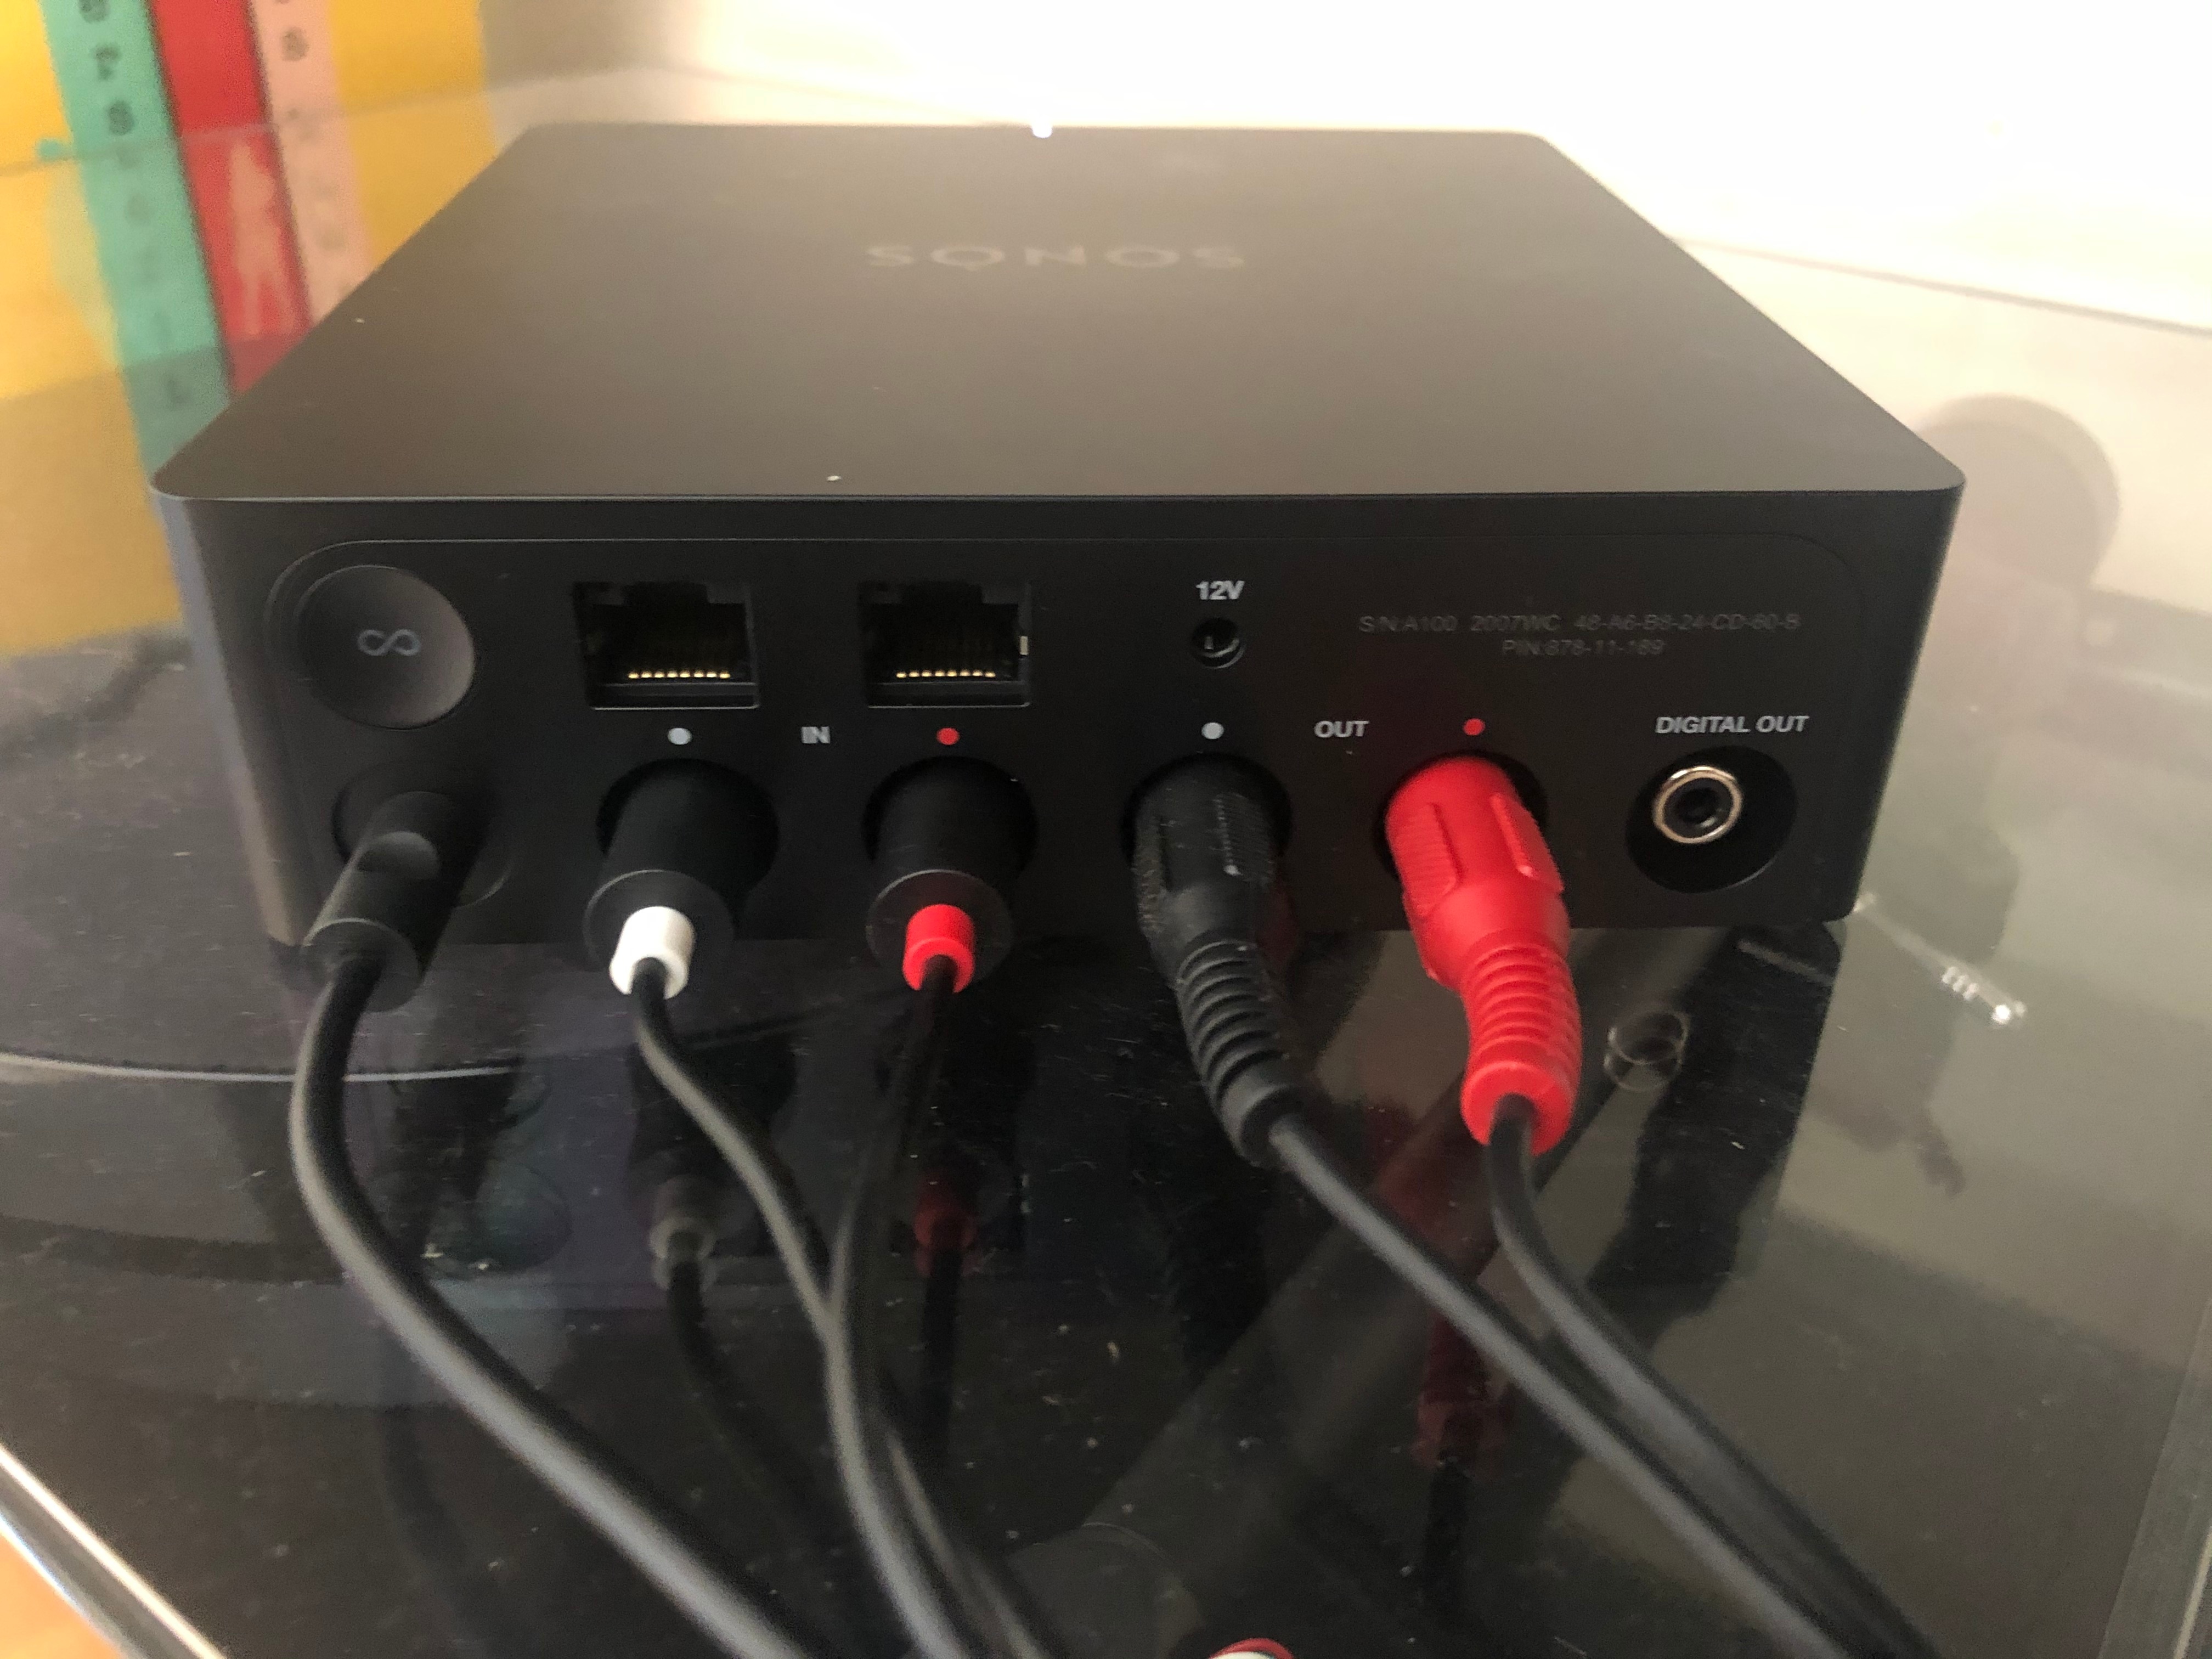 Cable management help/tips? : r/sonos